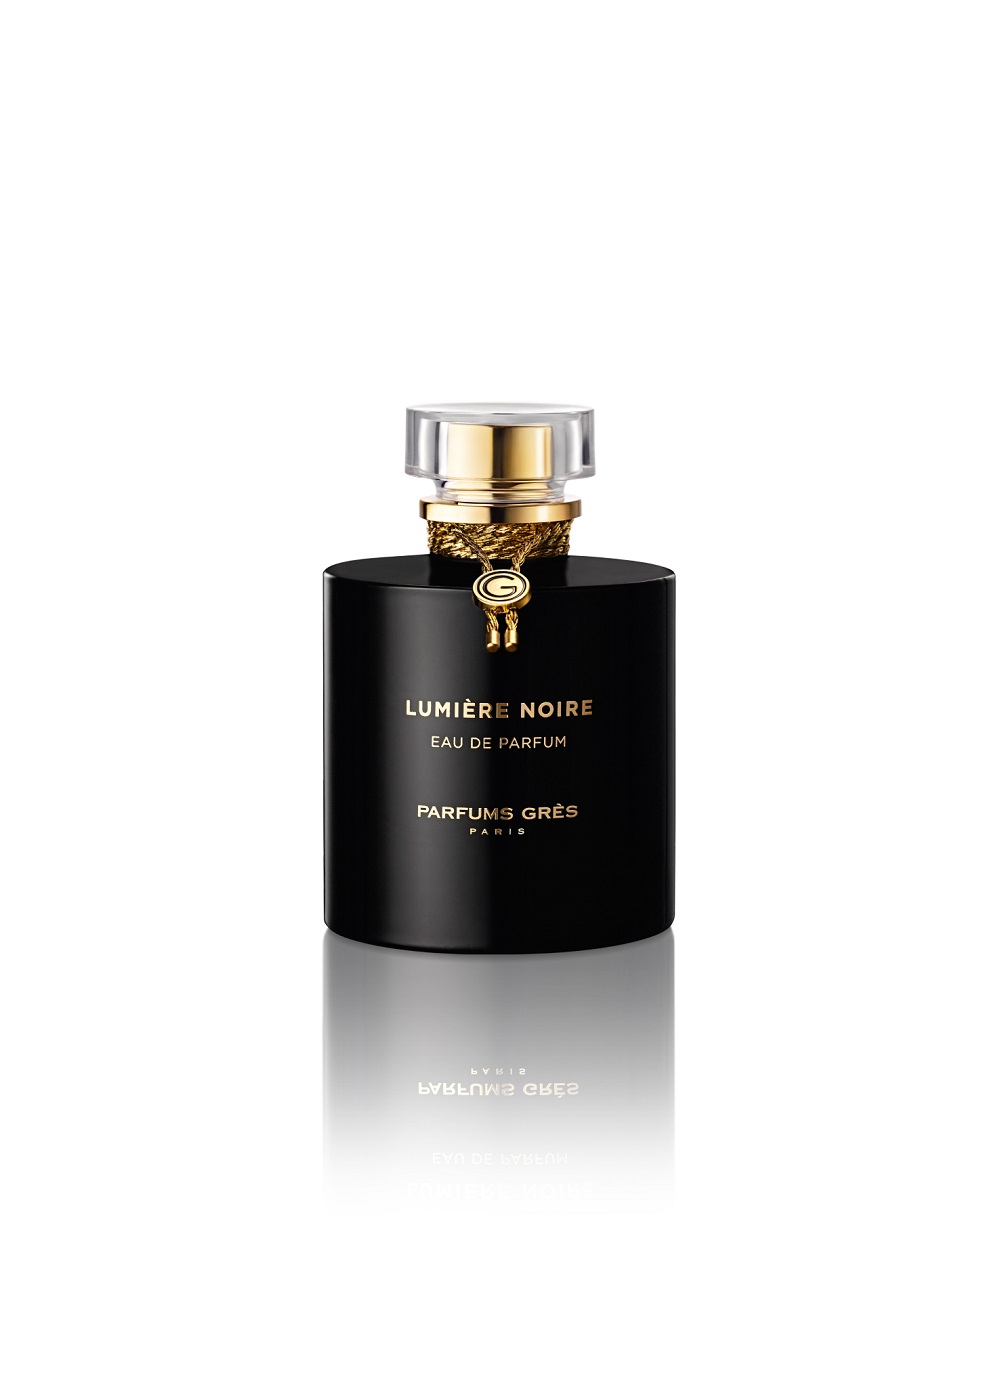 Lumiere Noire Gres perfume - a fragrance for women 2013